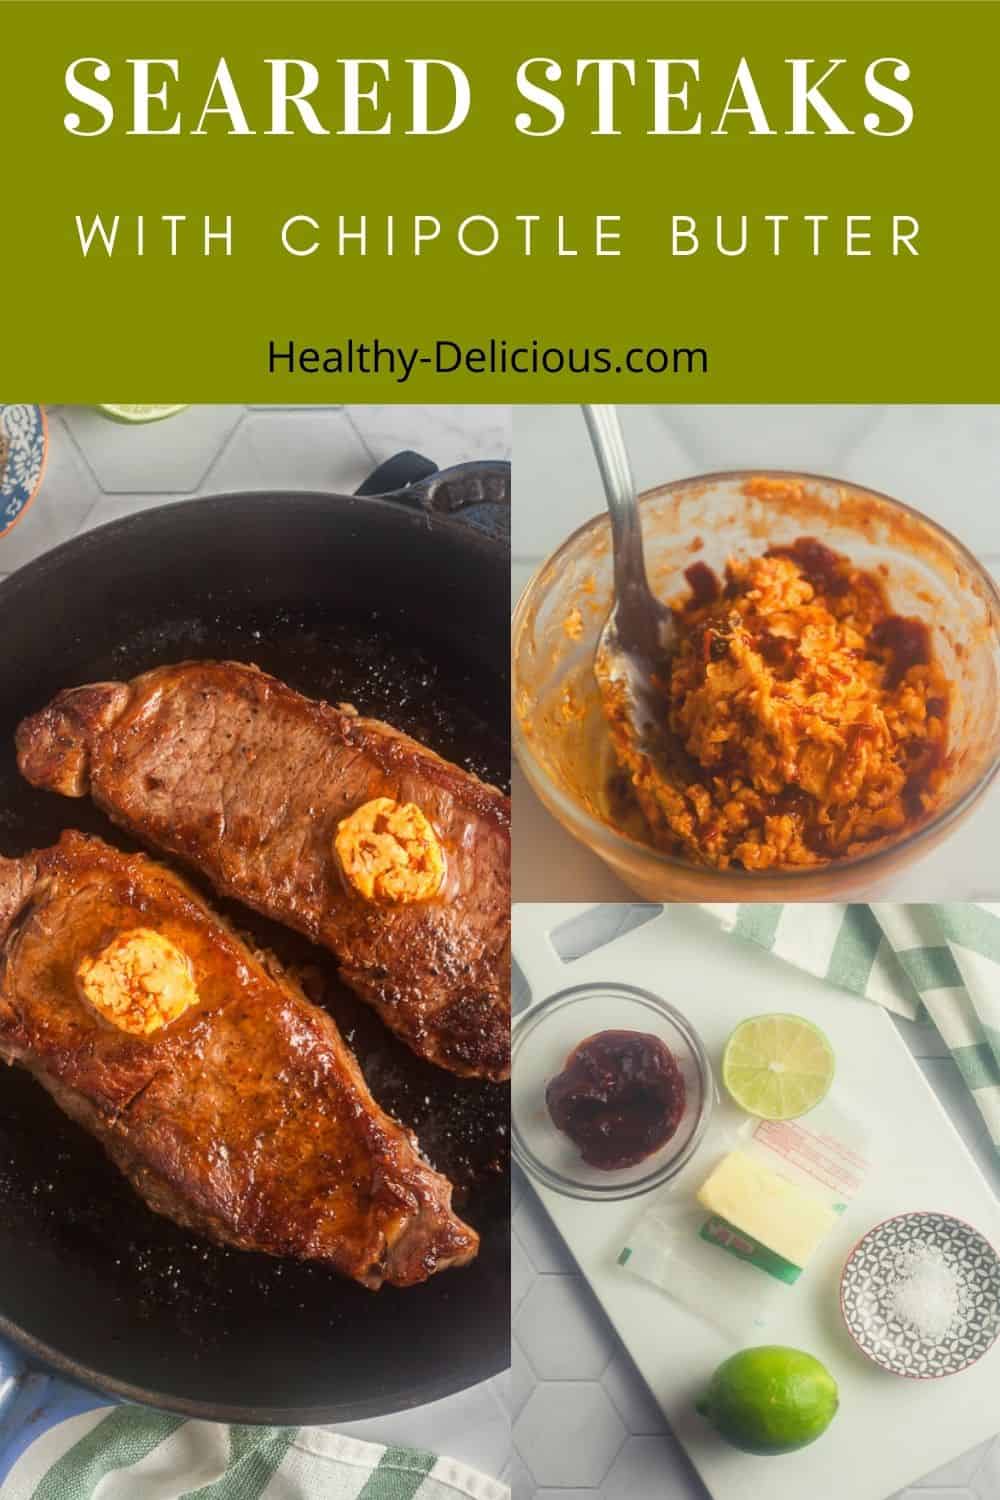 Perfectly seared steaks topped with chipotle compound butter look impressive, but they're so easy to make at home! In this post, I share some tips for the best homemade steaks. via @HealthyDelish